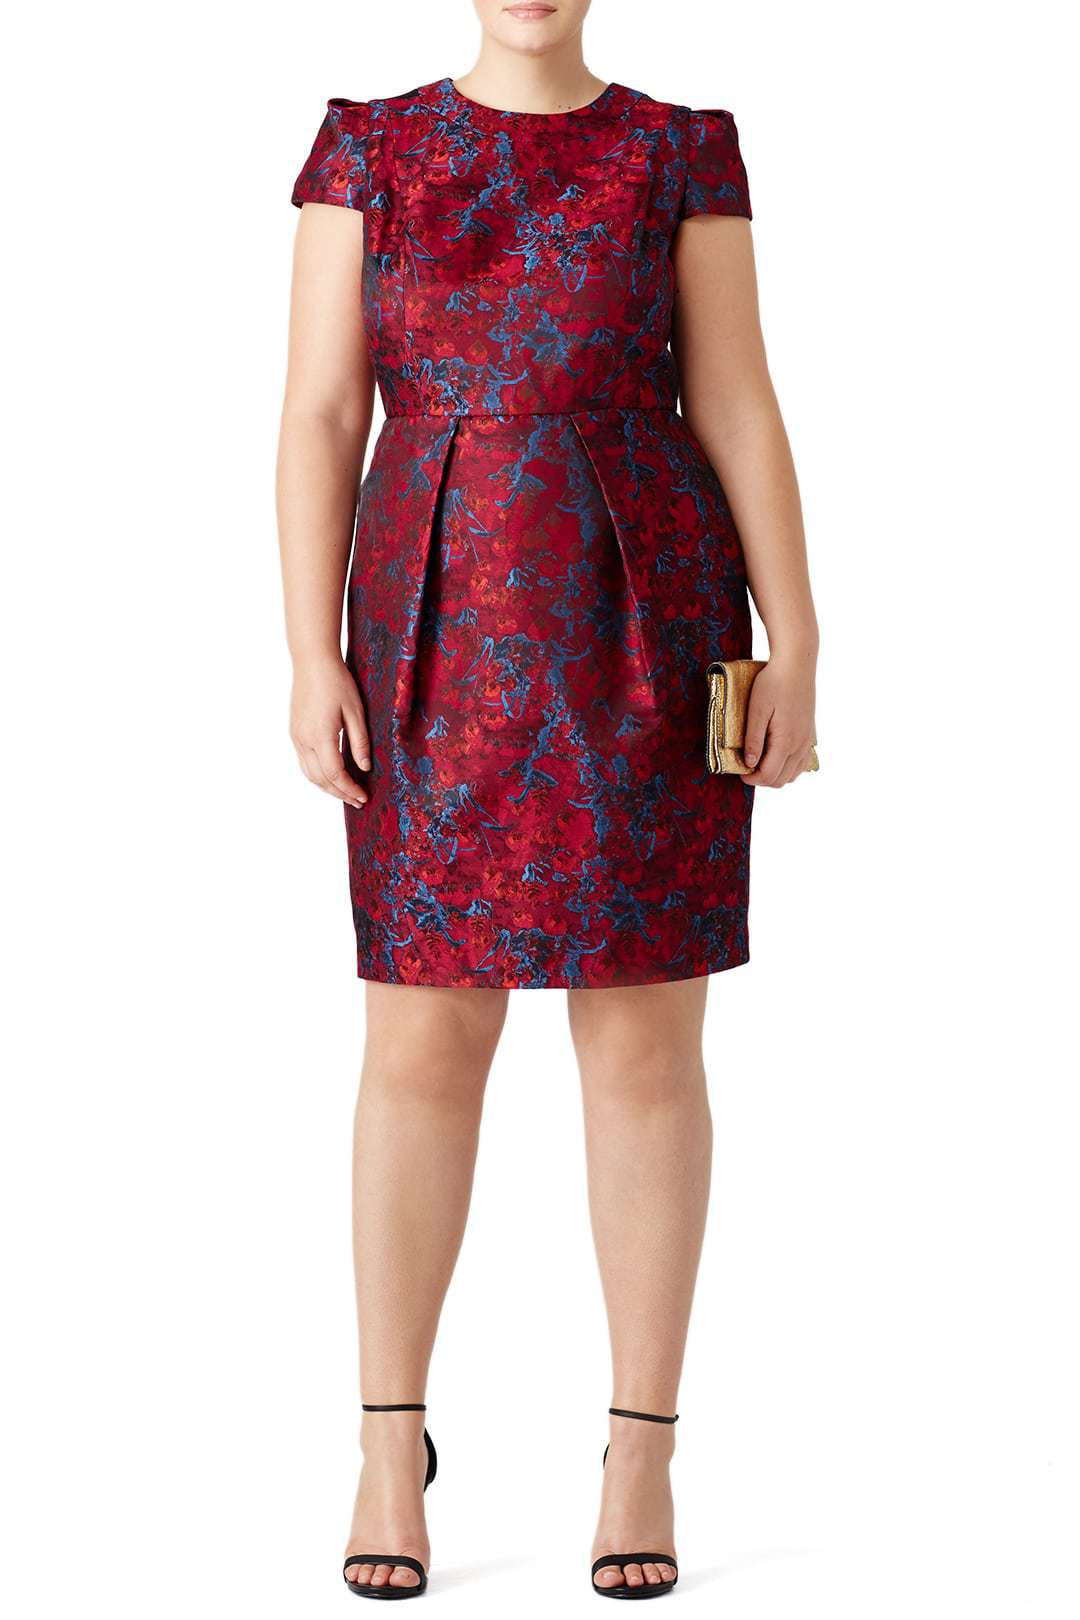 Carmen Marc Valvo plus size cocktail dress from Rent the Runway